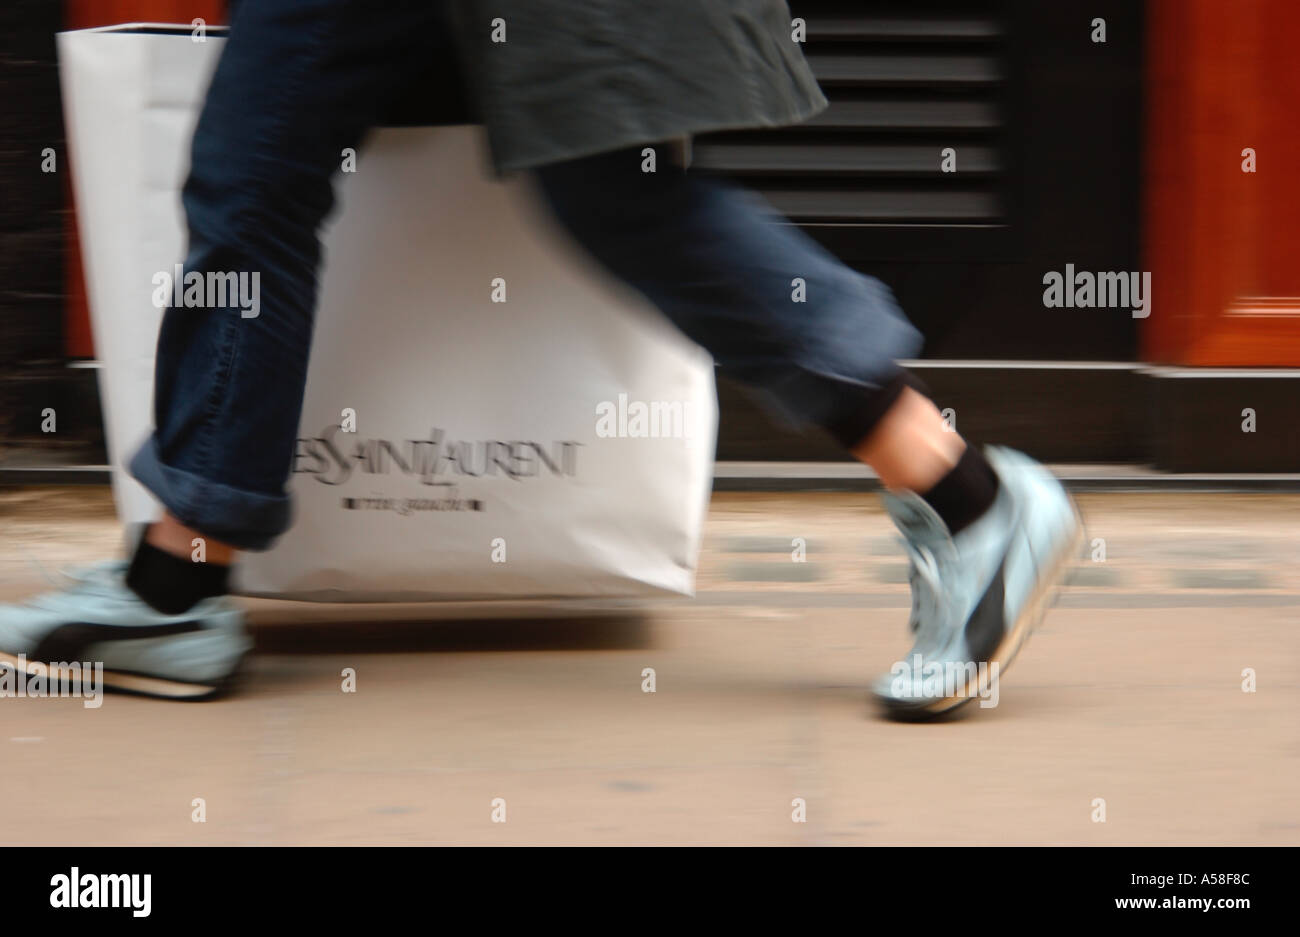 Woman With Shopping Bag Stock Photo